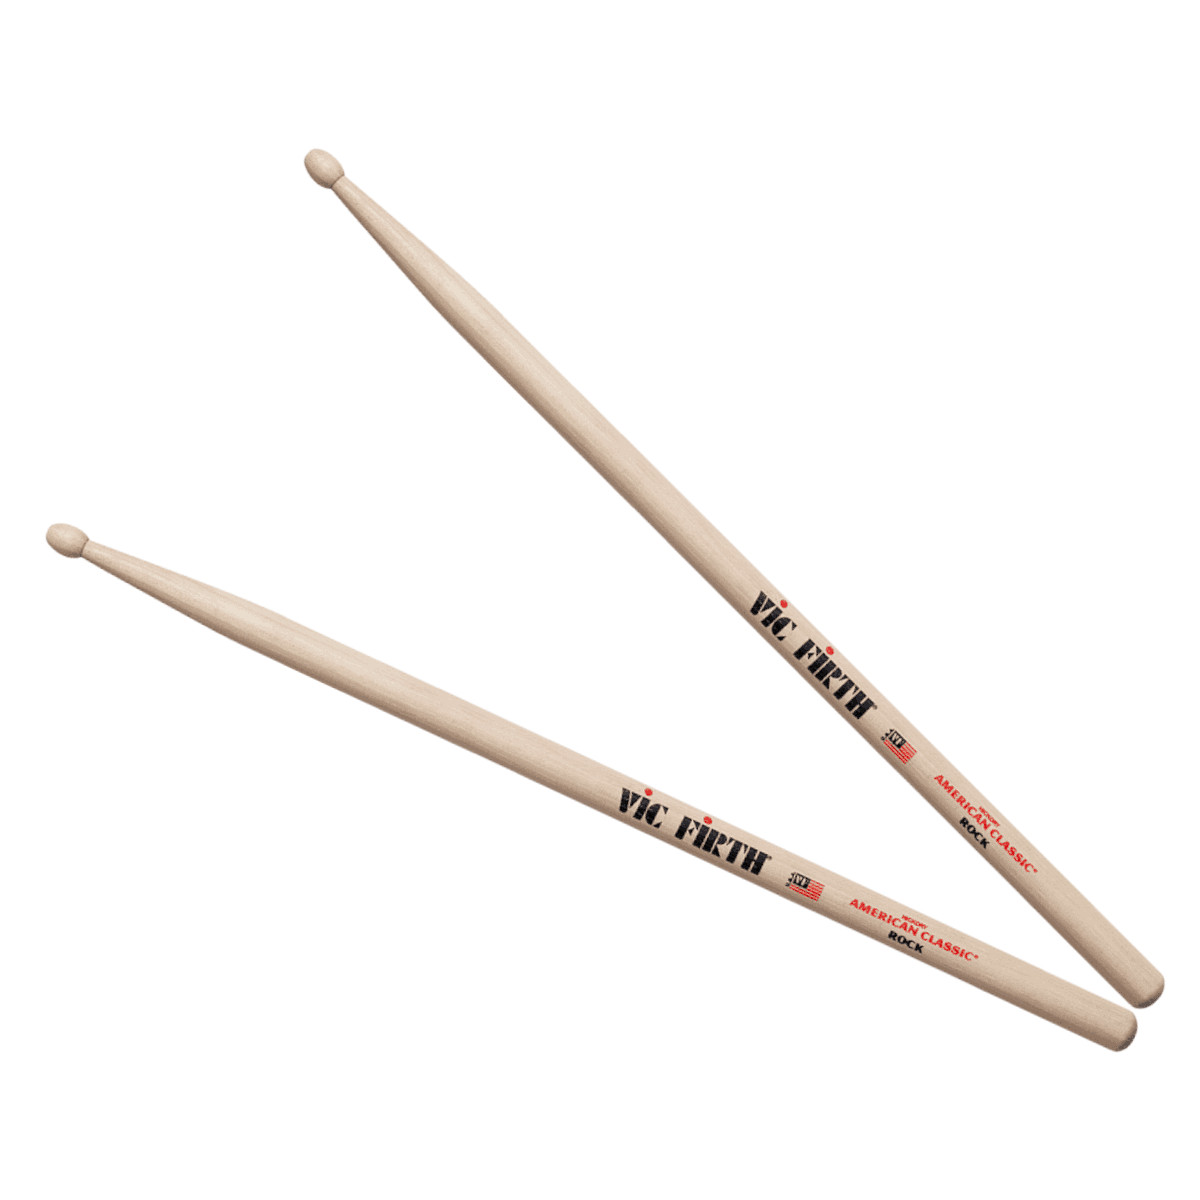 VIC FIRTH AMERICAN CLASSIC HICKORY ROCK